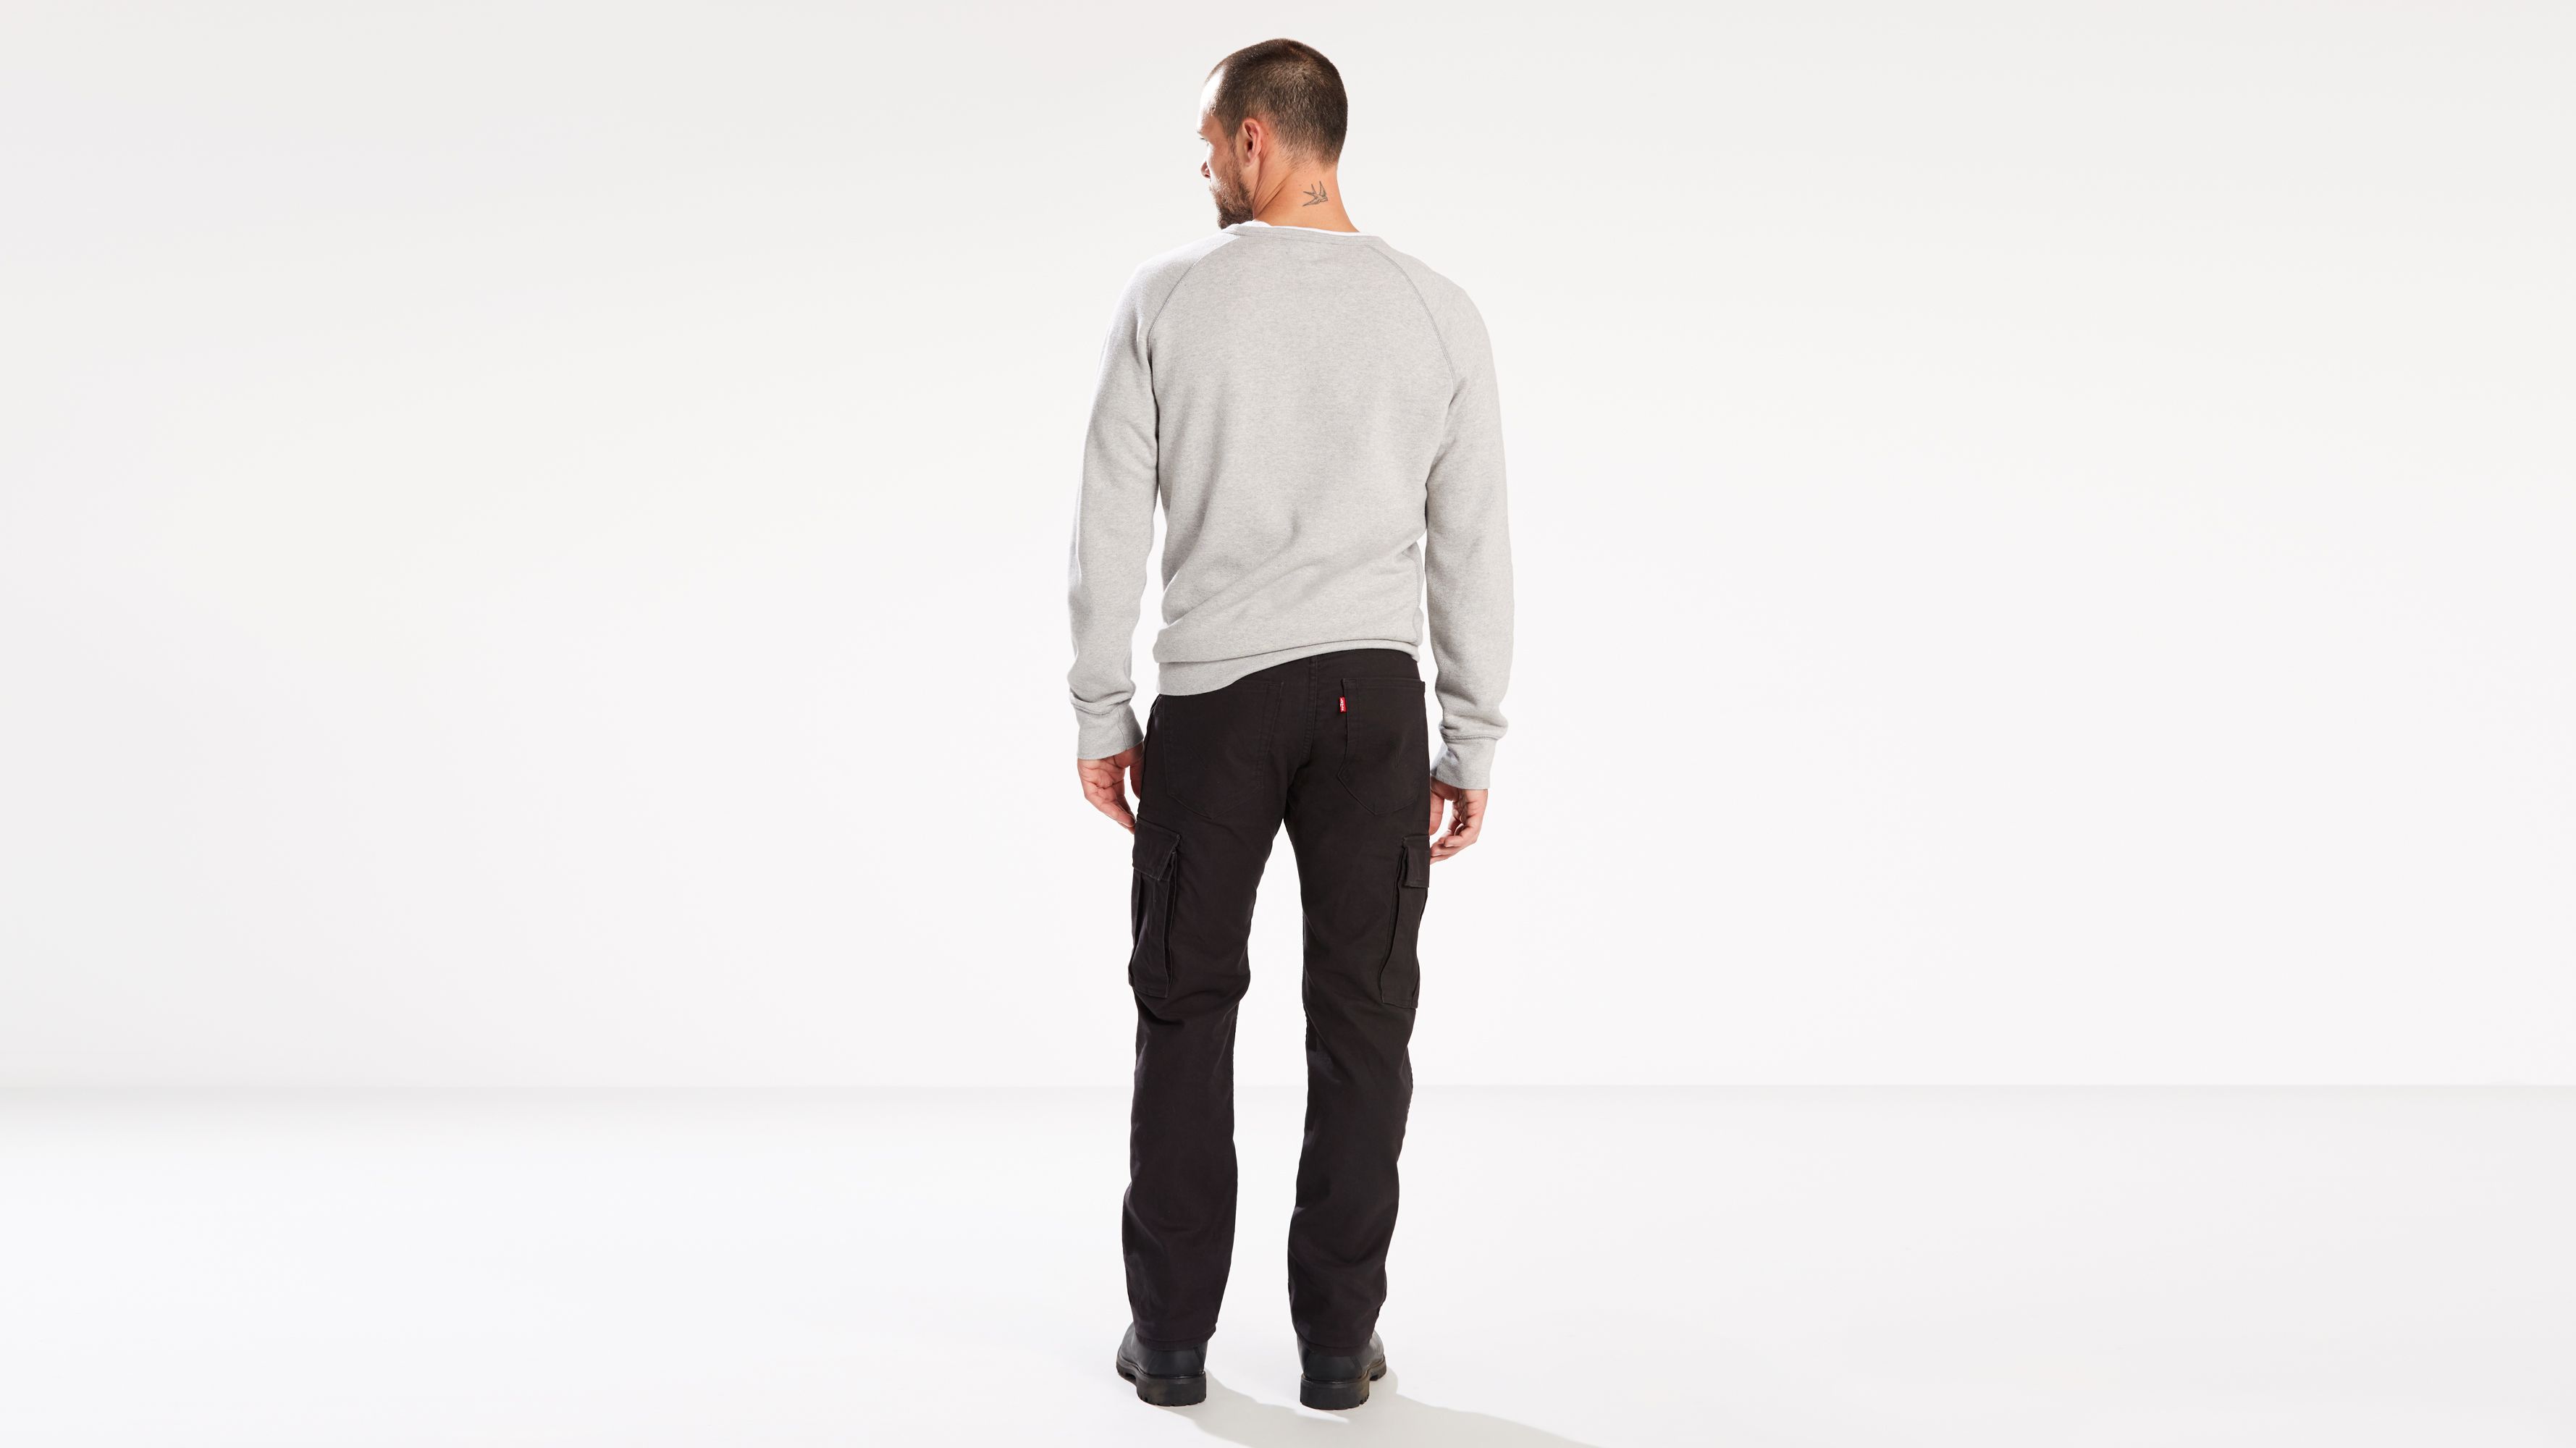 levi strauss two horse brand cargo pants